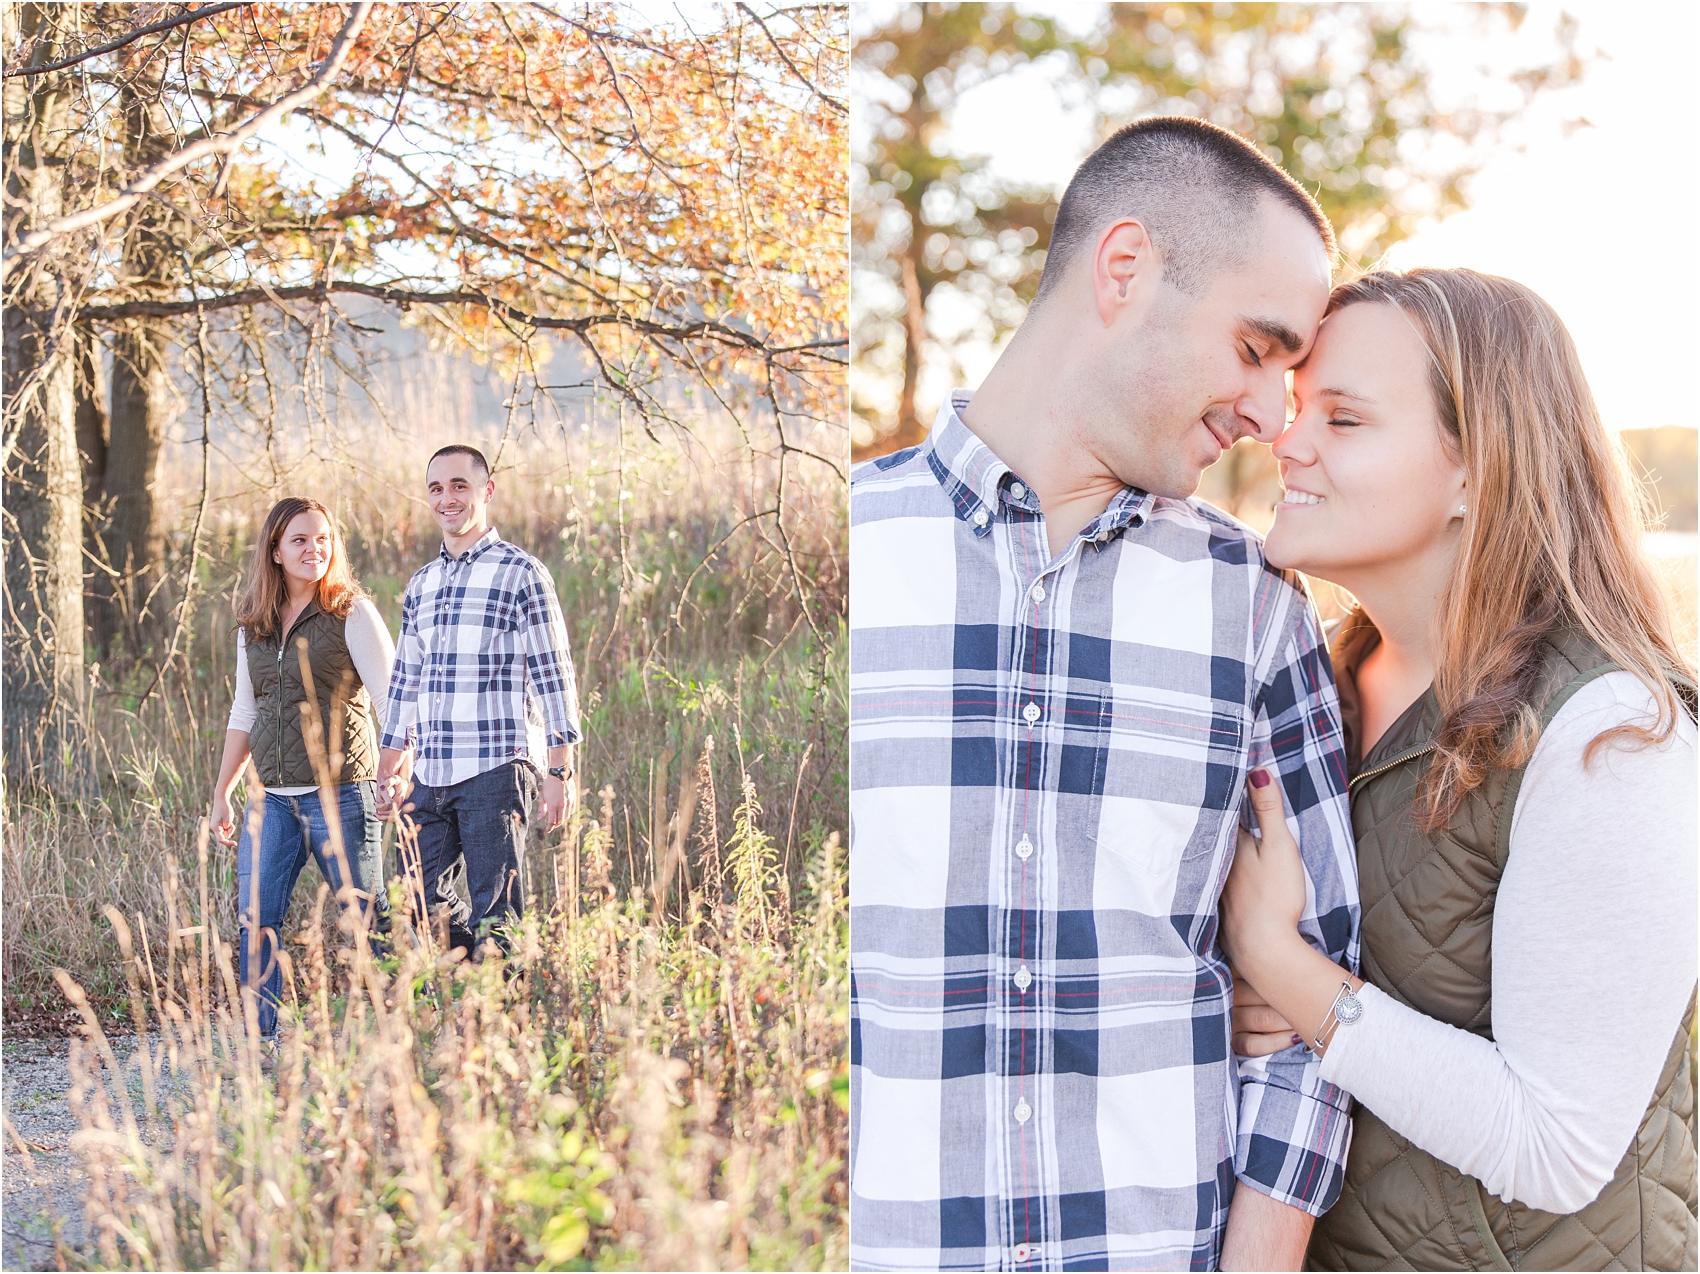 romantic-fall-engagement-photos-at-indian-springs-metropark-in-clarkston-mi-by-courtney-carolyn-photography_0002.jpg